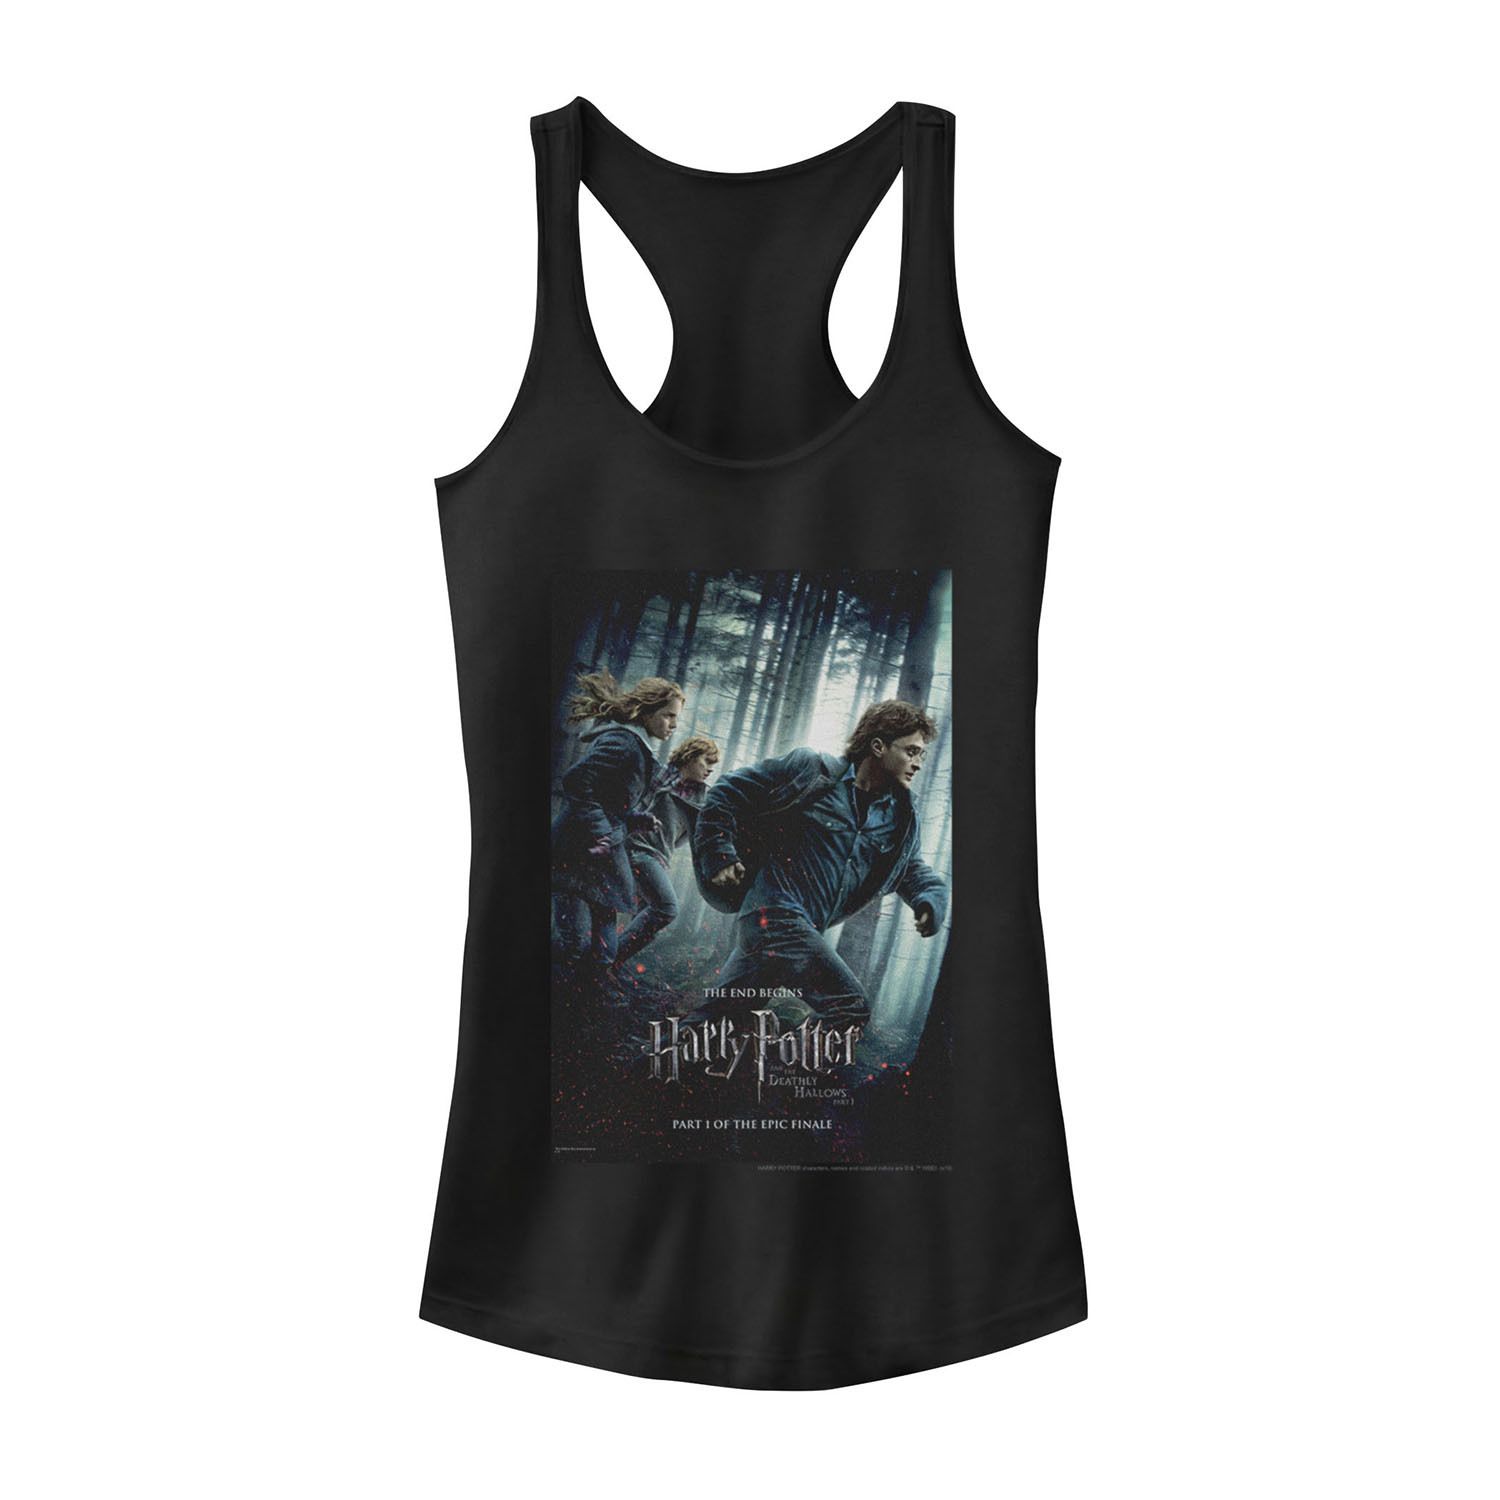 Image for Harry Potter Juniors' Deathly Hallows Group Shot Poster Tank Top at Kohl's.